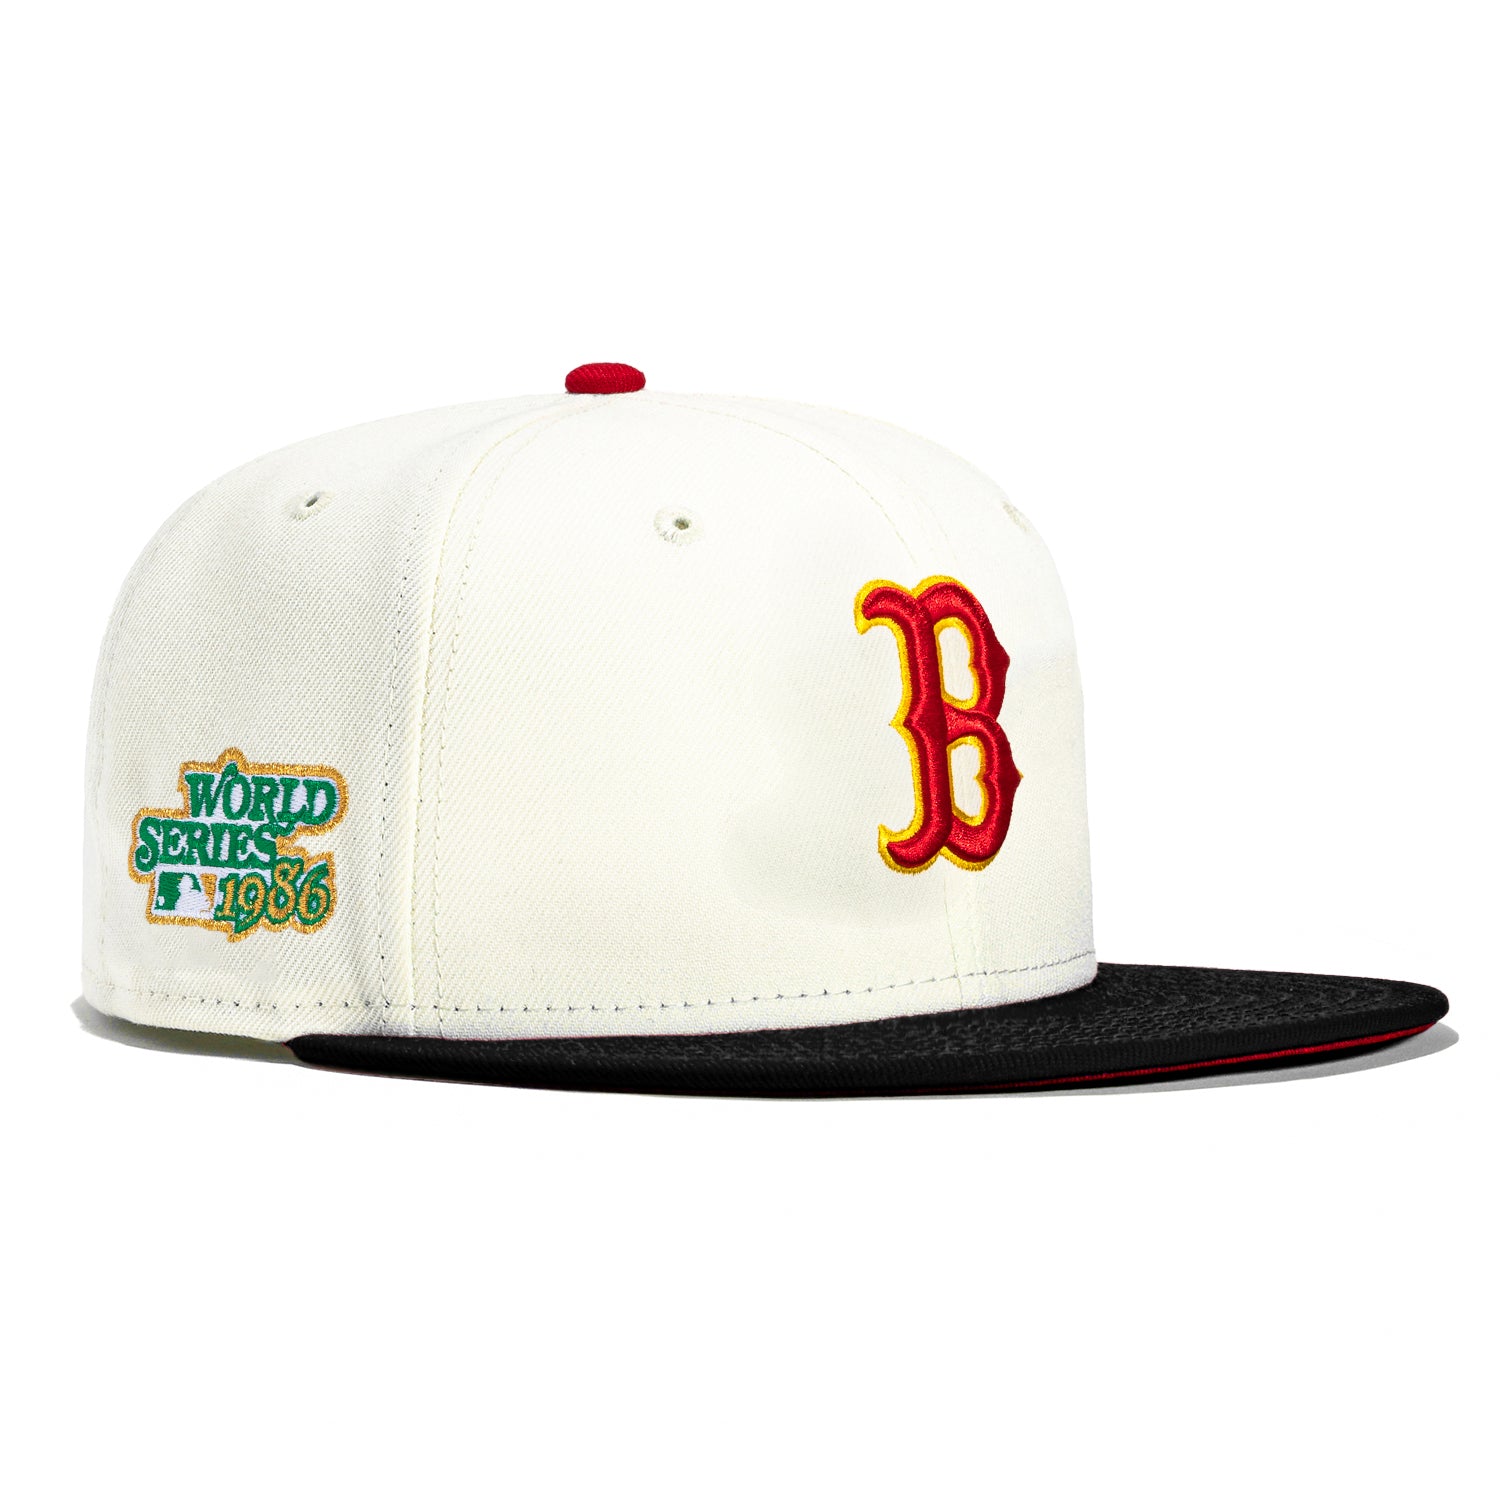 New Era 59Fifty Boston Red Sox 1986 World Series Patch Hat - White, Bl –  Hat Club